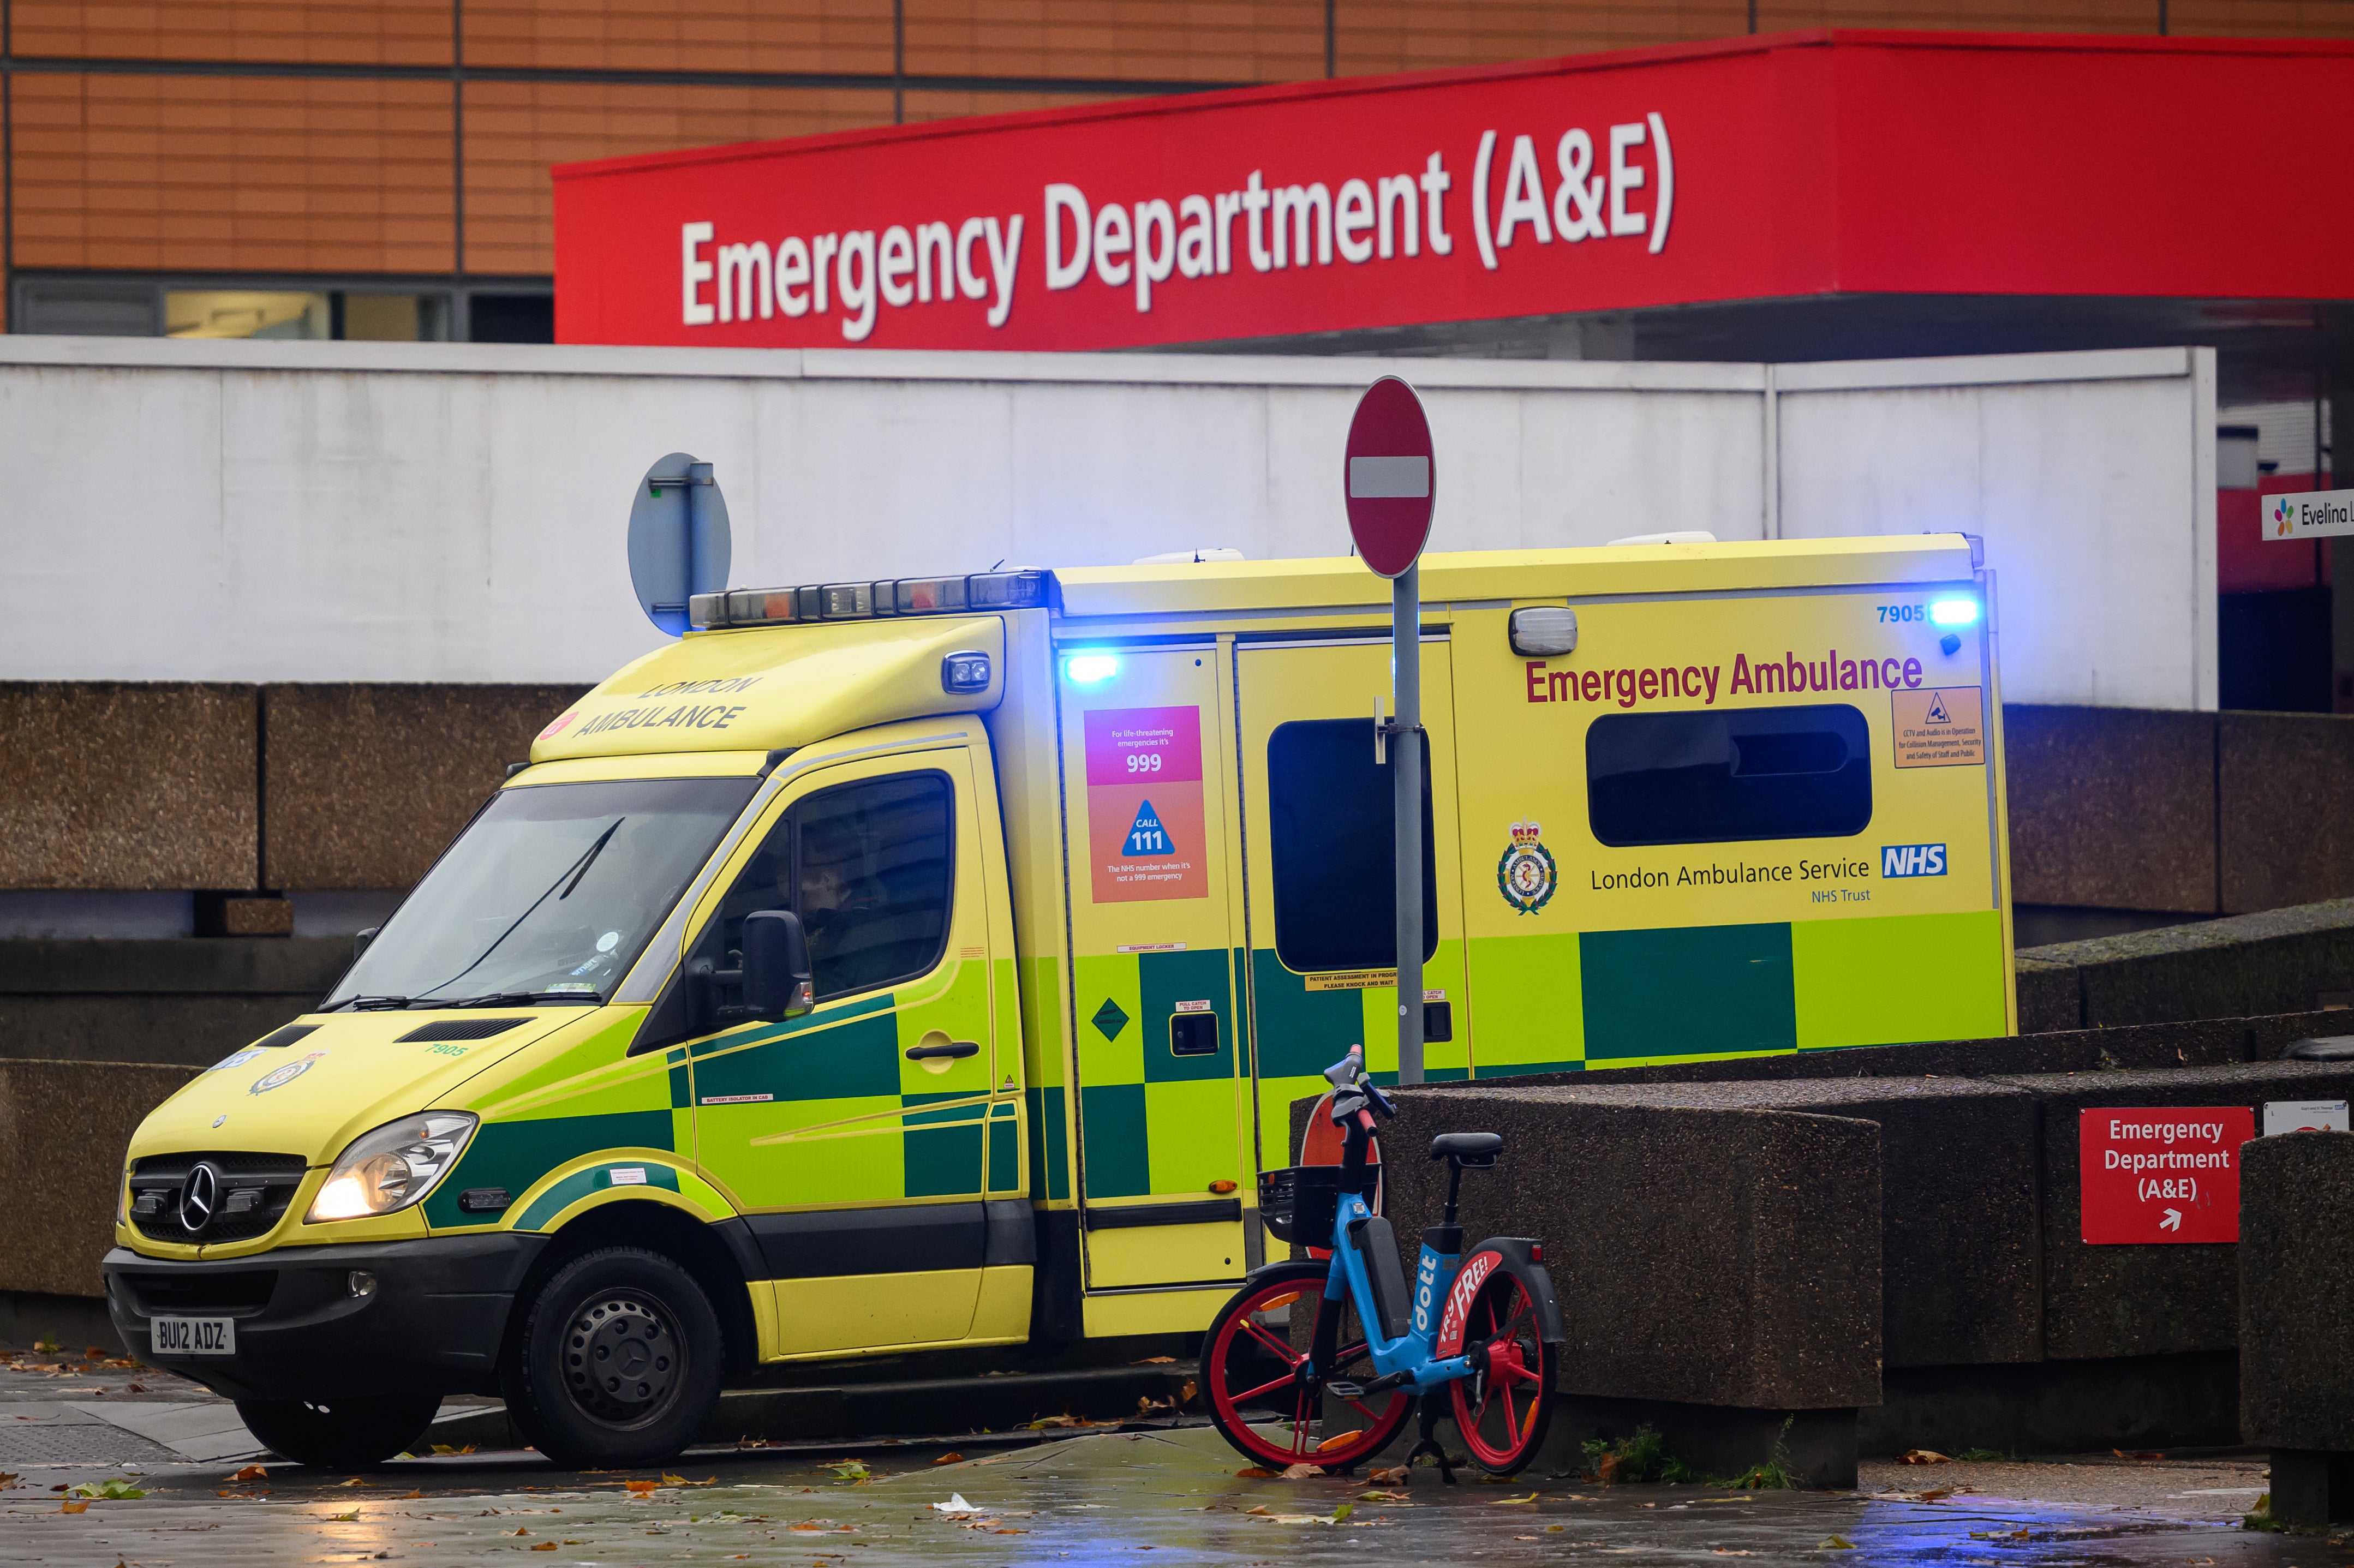 ‘A&E was another world/ Where time stood still beneath the clock’